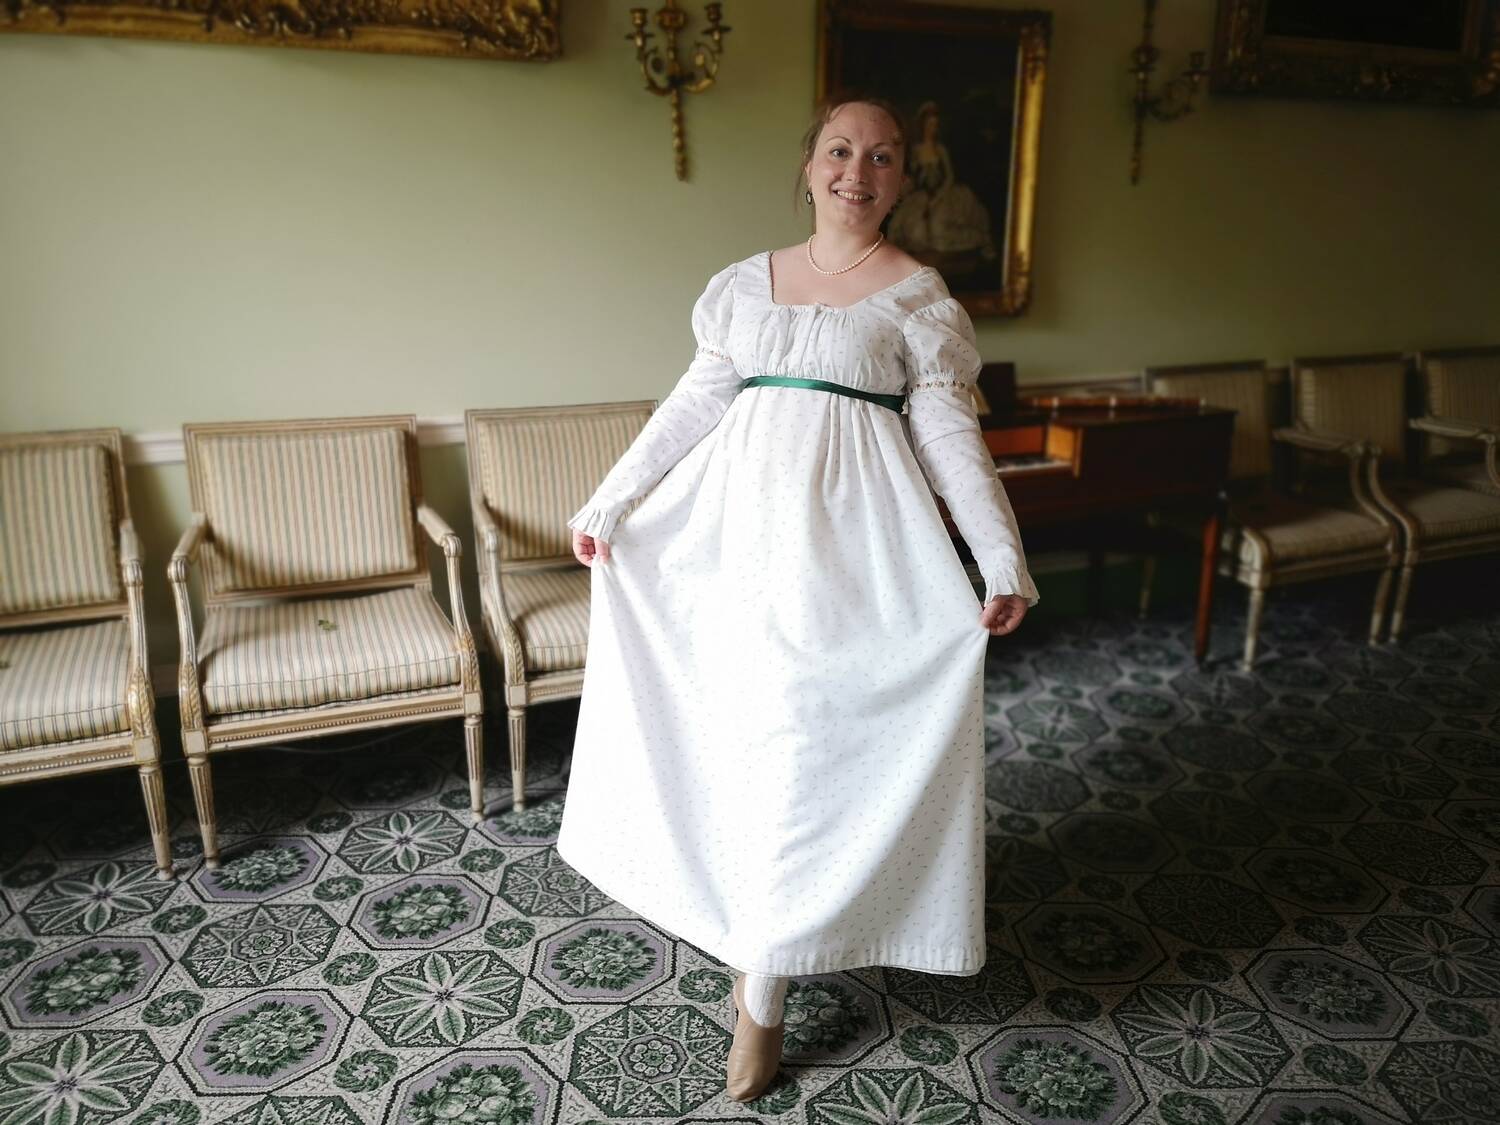 A woman in a white 18th-century dress with a green ribbon under the bust holds her skirts and points her foot forward and to the floor, as if about to dance.